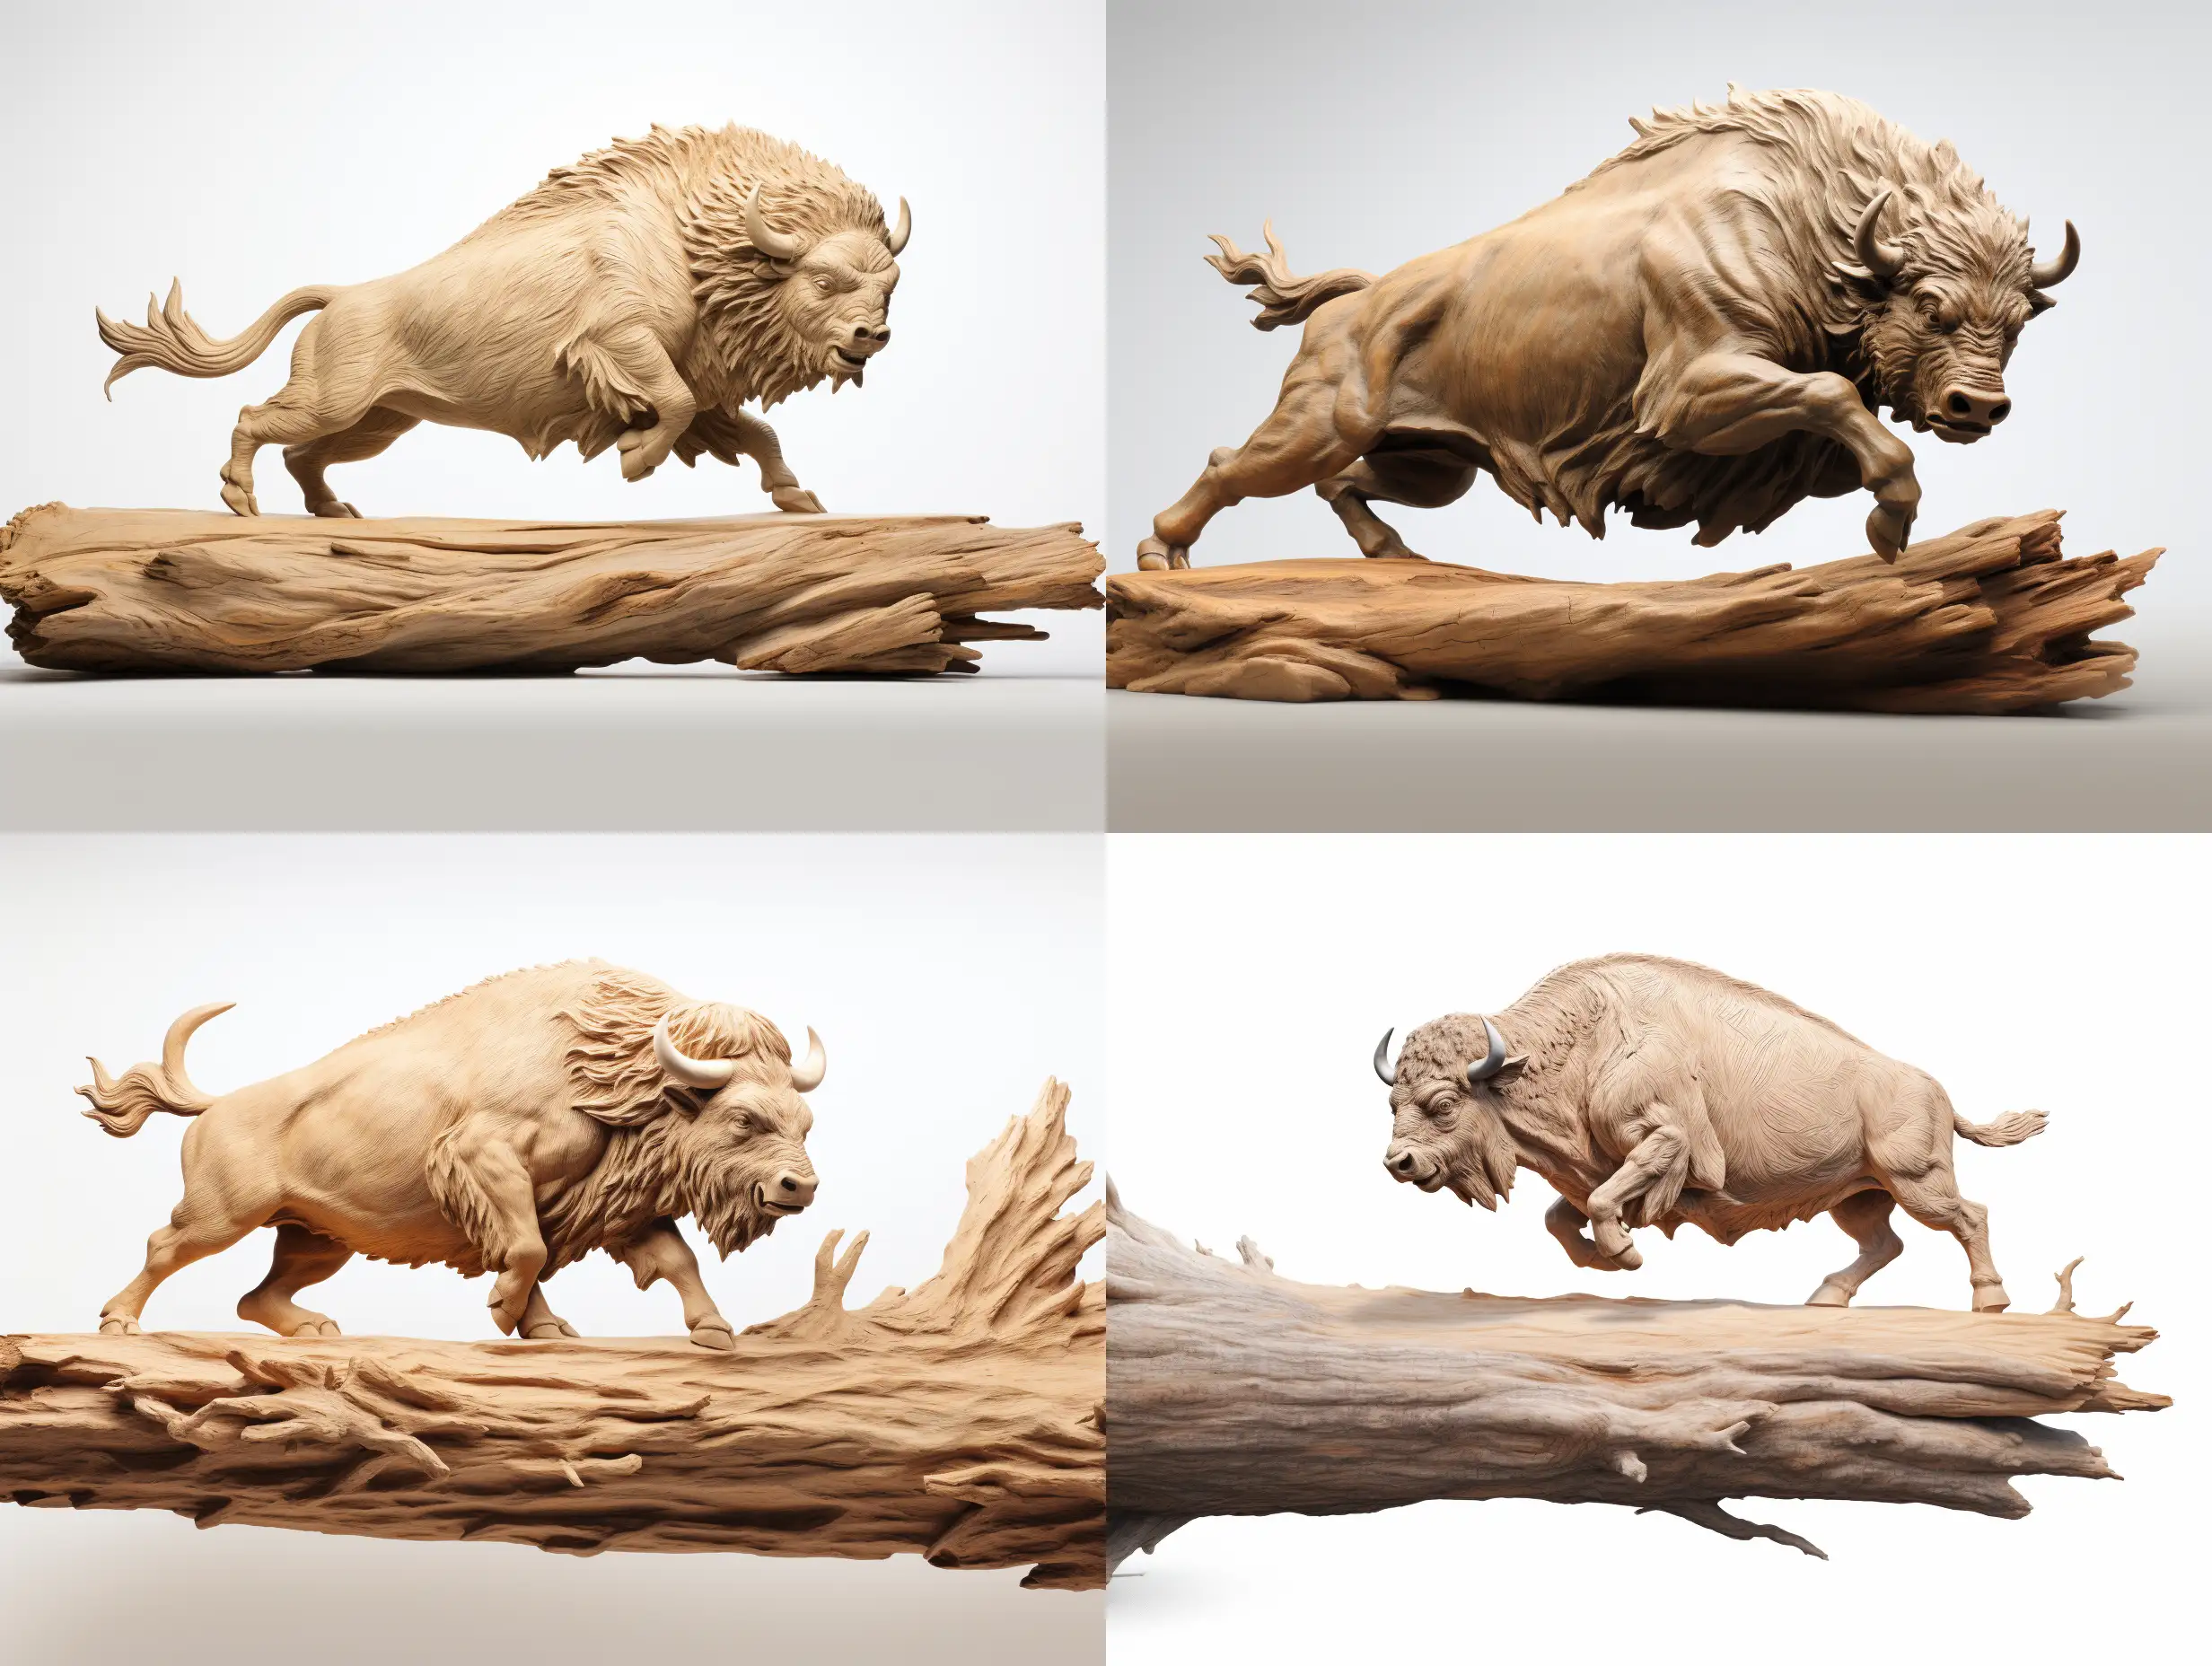 Dynamic-Wooden-Buffalo-Sculpture-in-Action-Realistic-3D-Carving